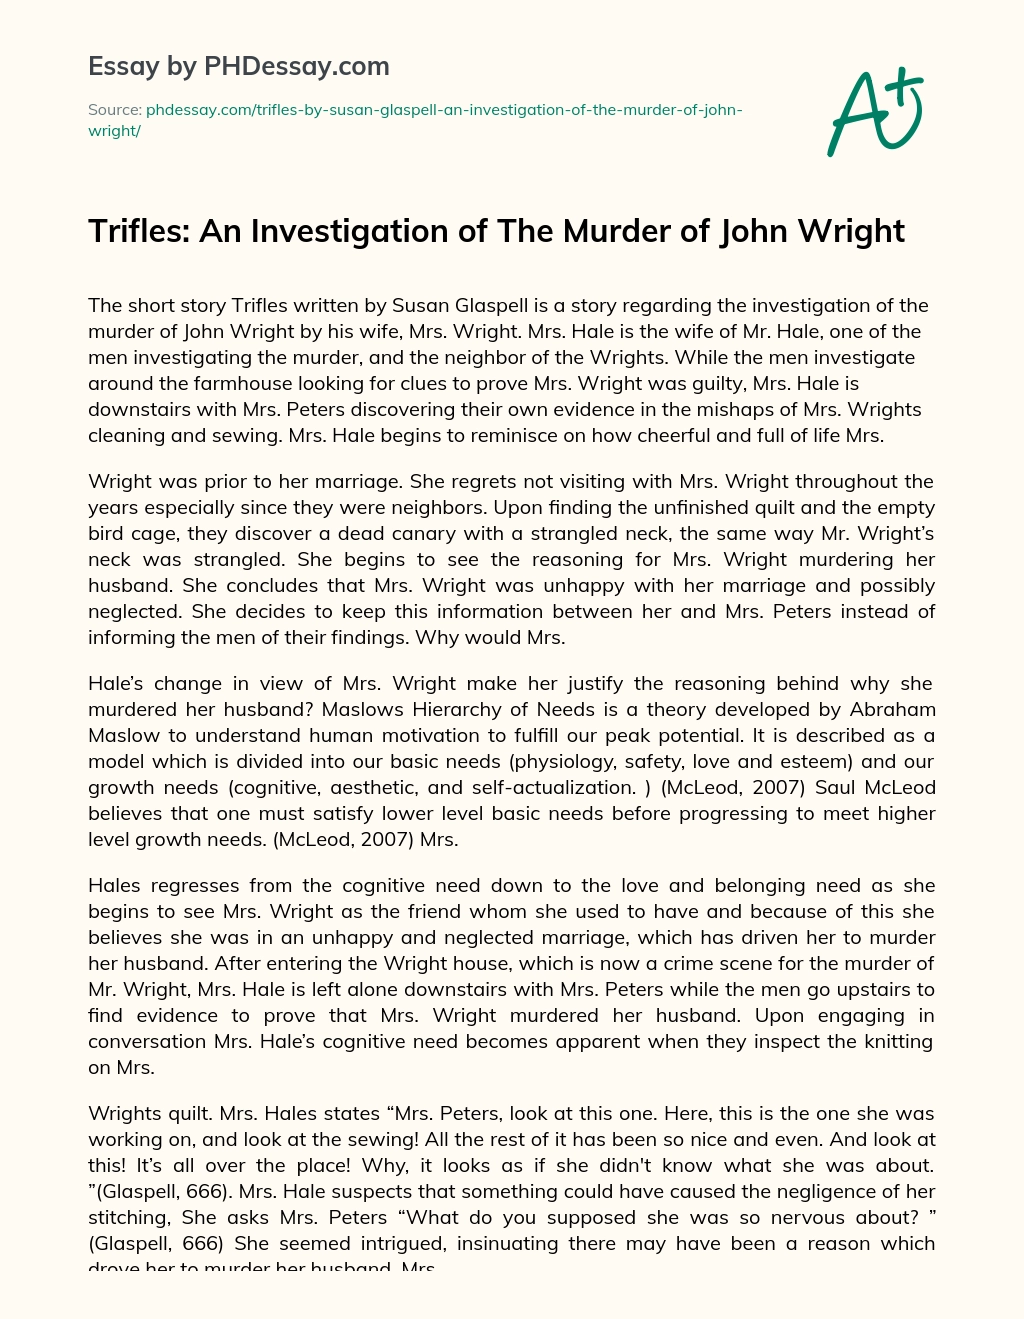 Trifles: An Investigation of The Murder of John Wright essay